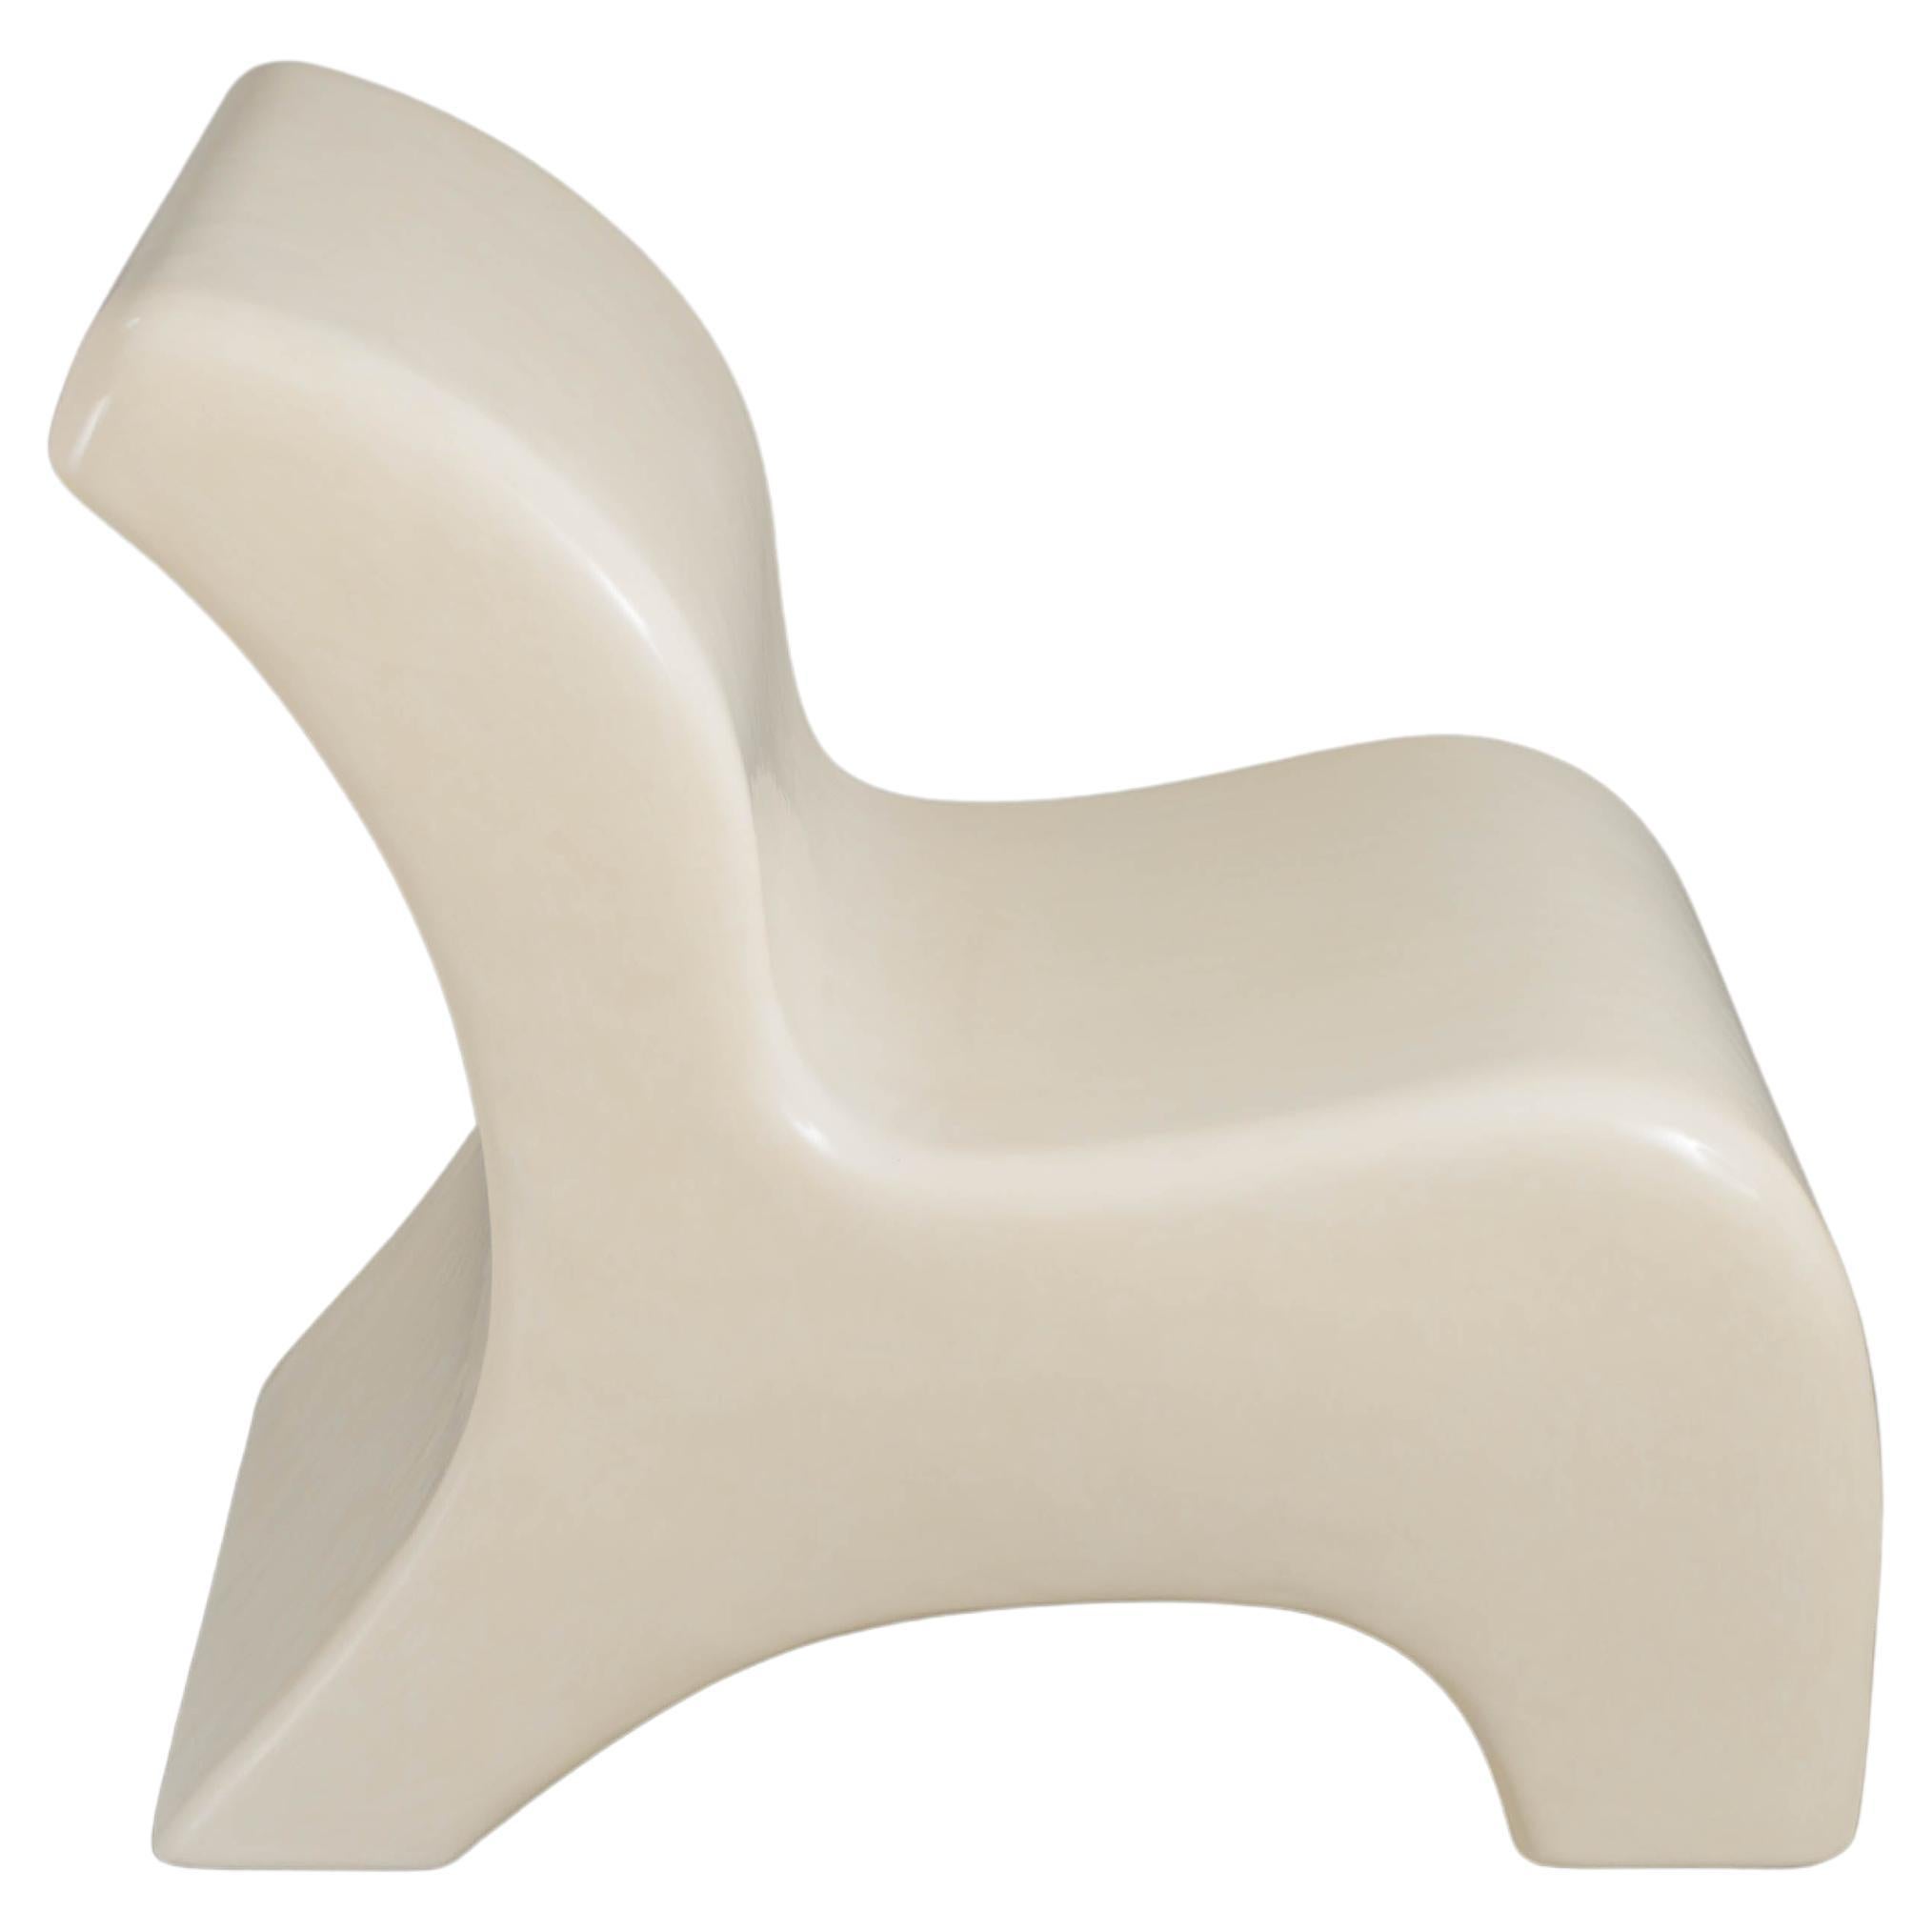 Chair, Cream Lacquer by Robert Kuo, Handmade, Limited Edition